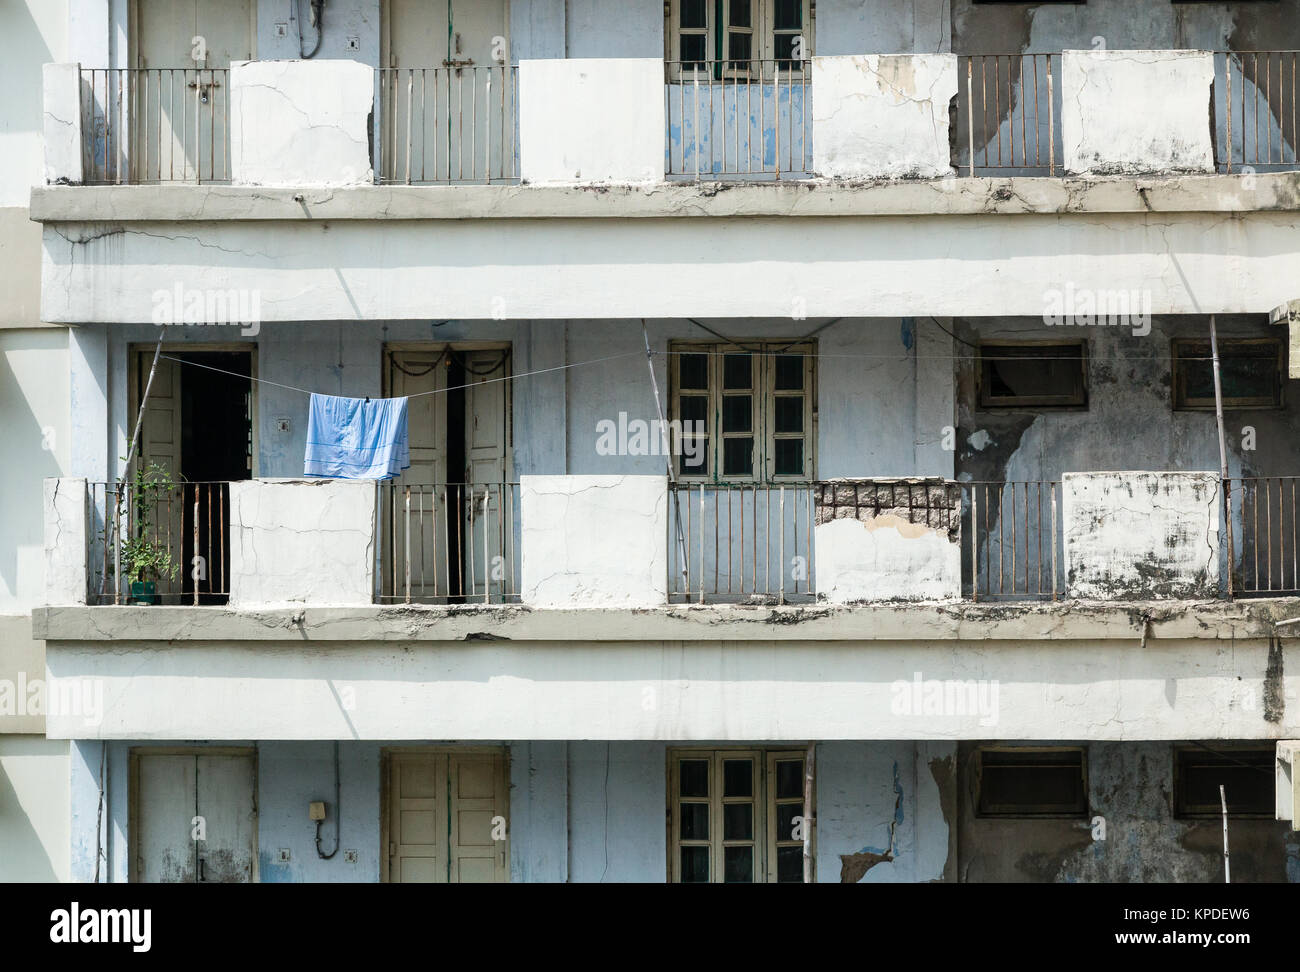 Squalid housing in Calcutta (Kolkata) in India.  The derelict appartment blocks are still home to families. Stock Photo